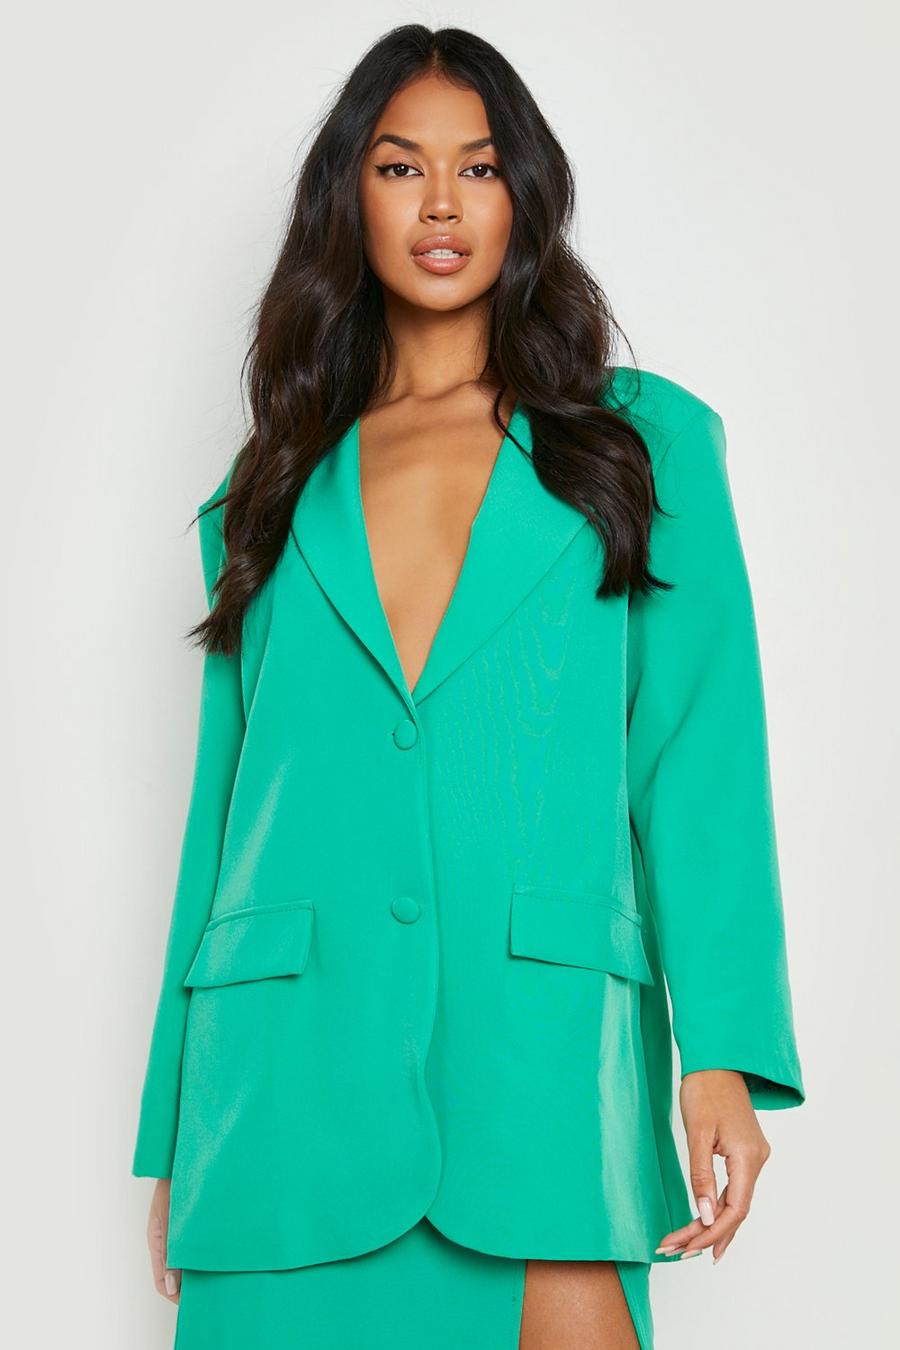 Bright green Relaxed Fit Single Breasted Blazer